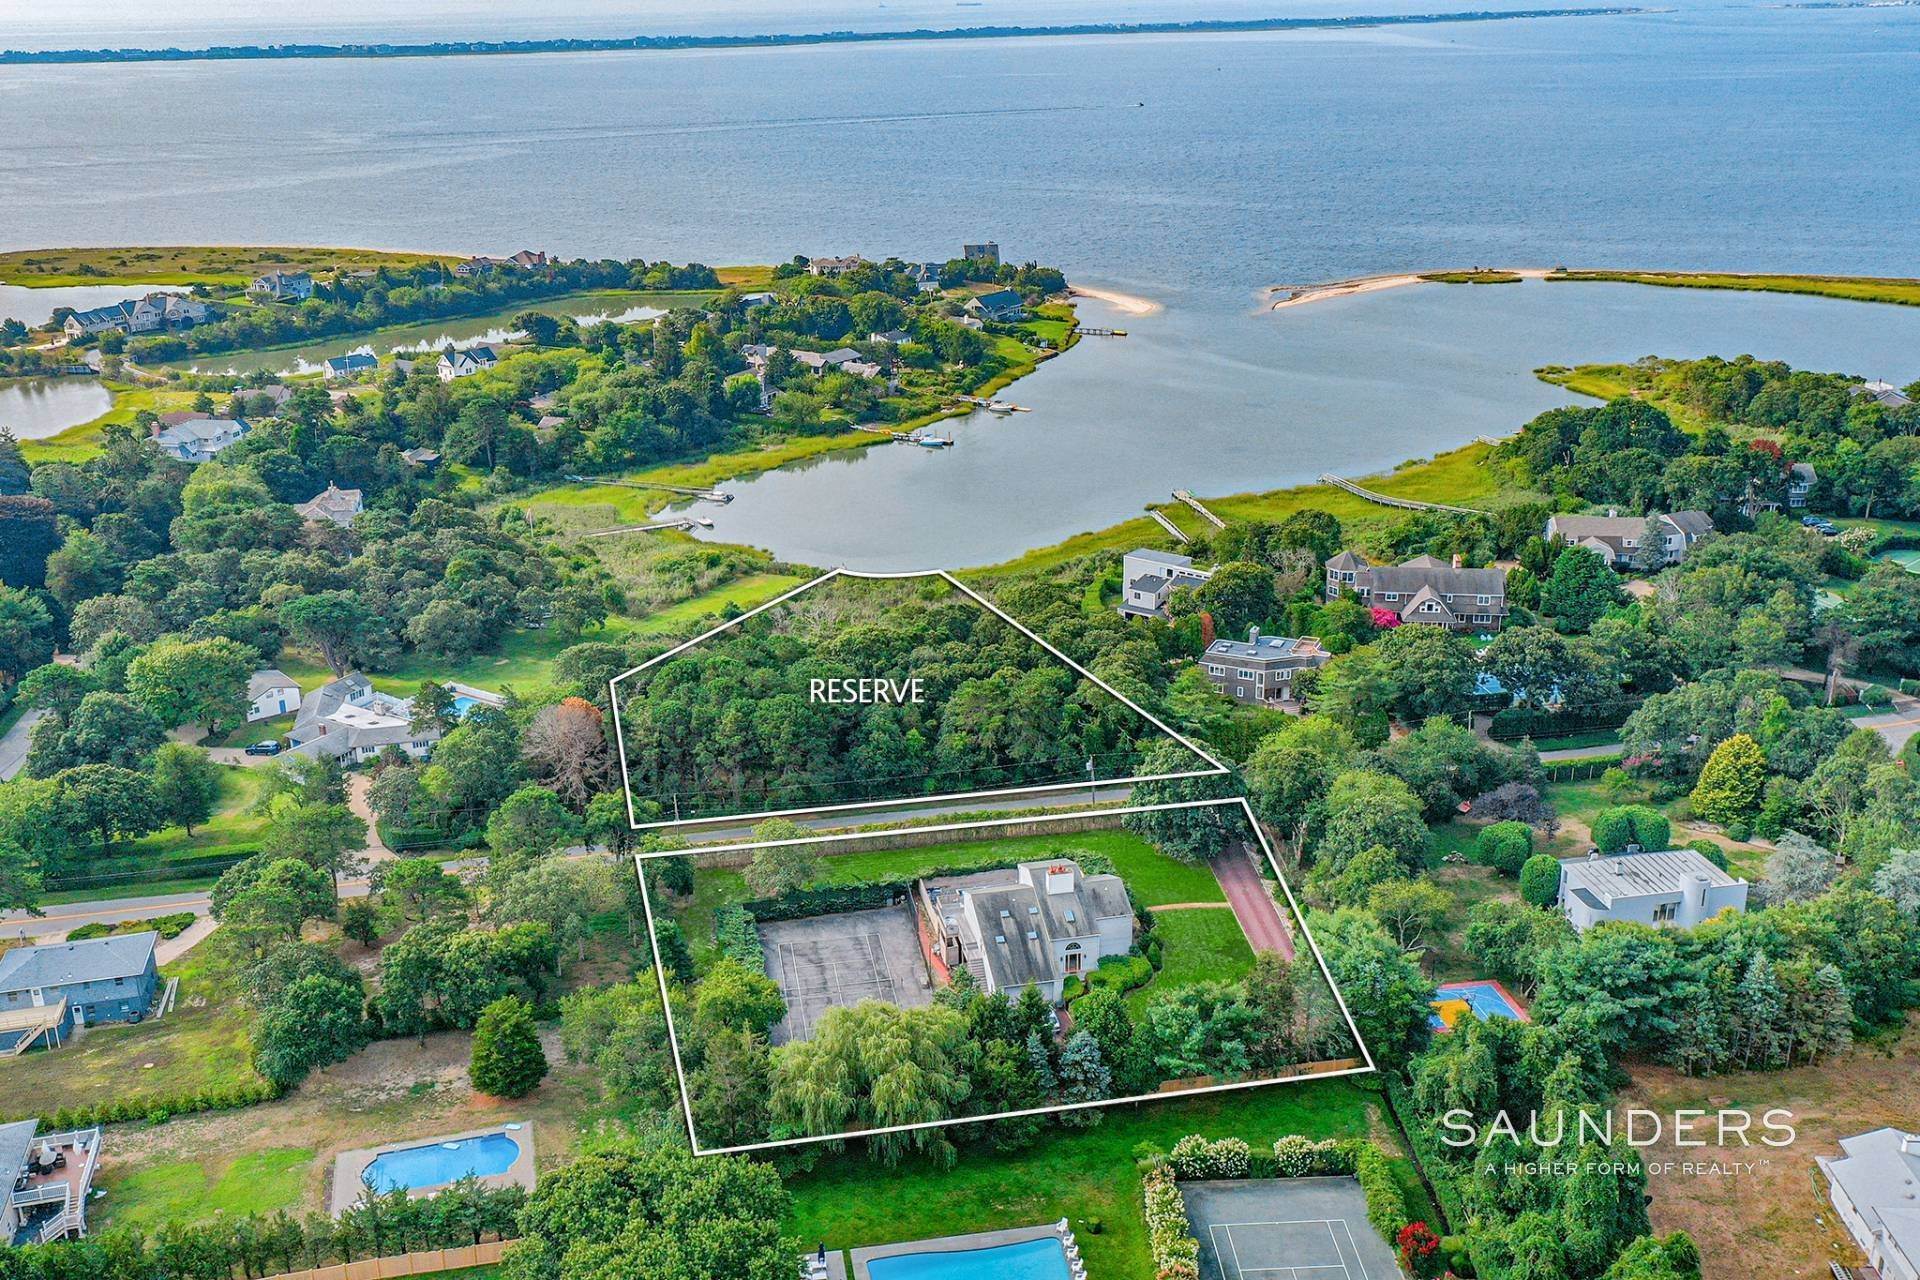 Single Family Homes for Sale at Overlooking Reserve With Pool And Tennis 103 Middle Pond Road, Shinnecock Hills, Southampton, NY 11968